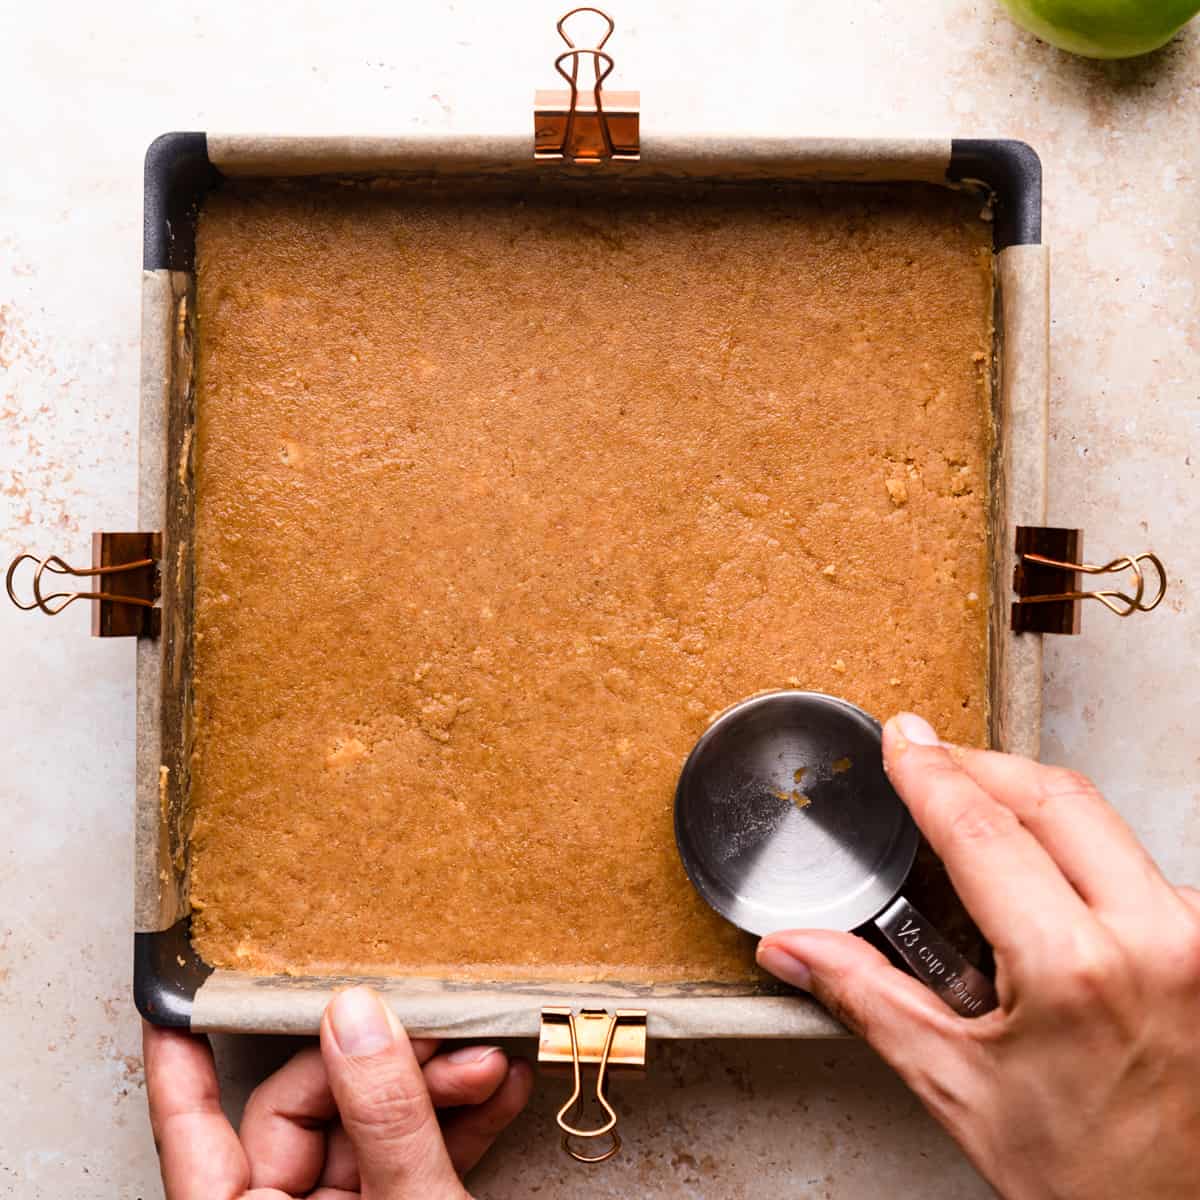 cheesecake crust being pressed into baking tin.